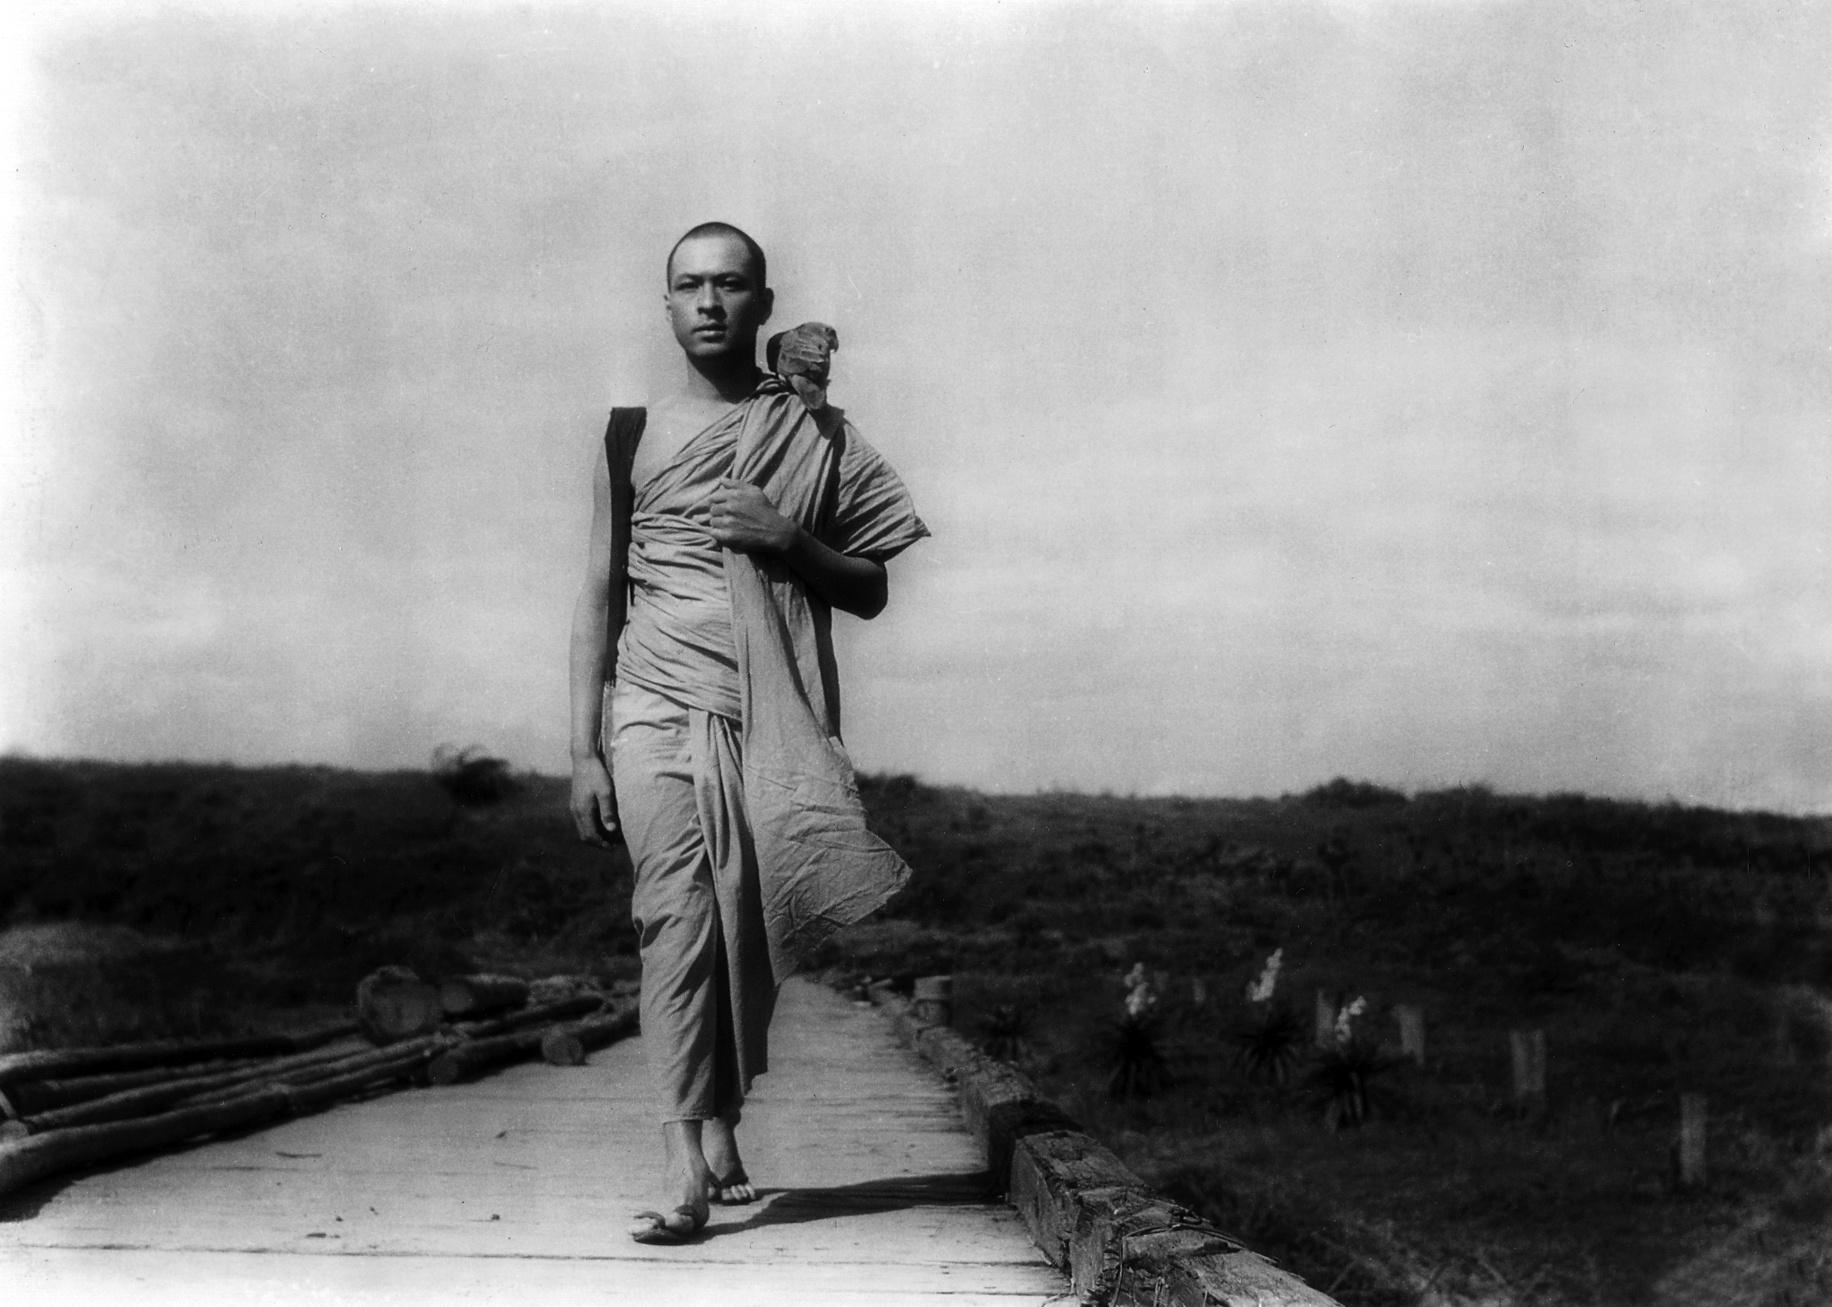 A man dressed as a monk walking on a path.